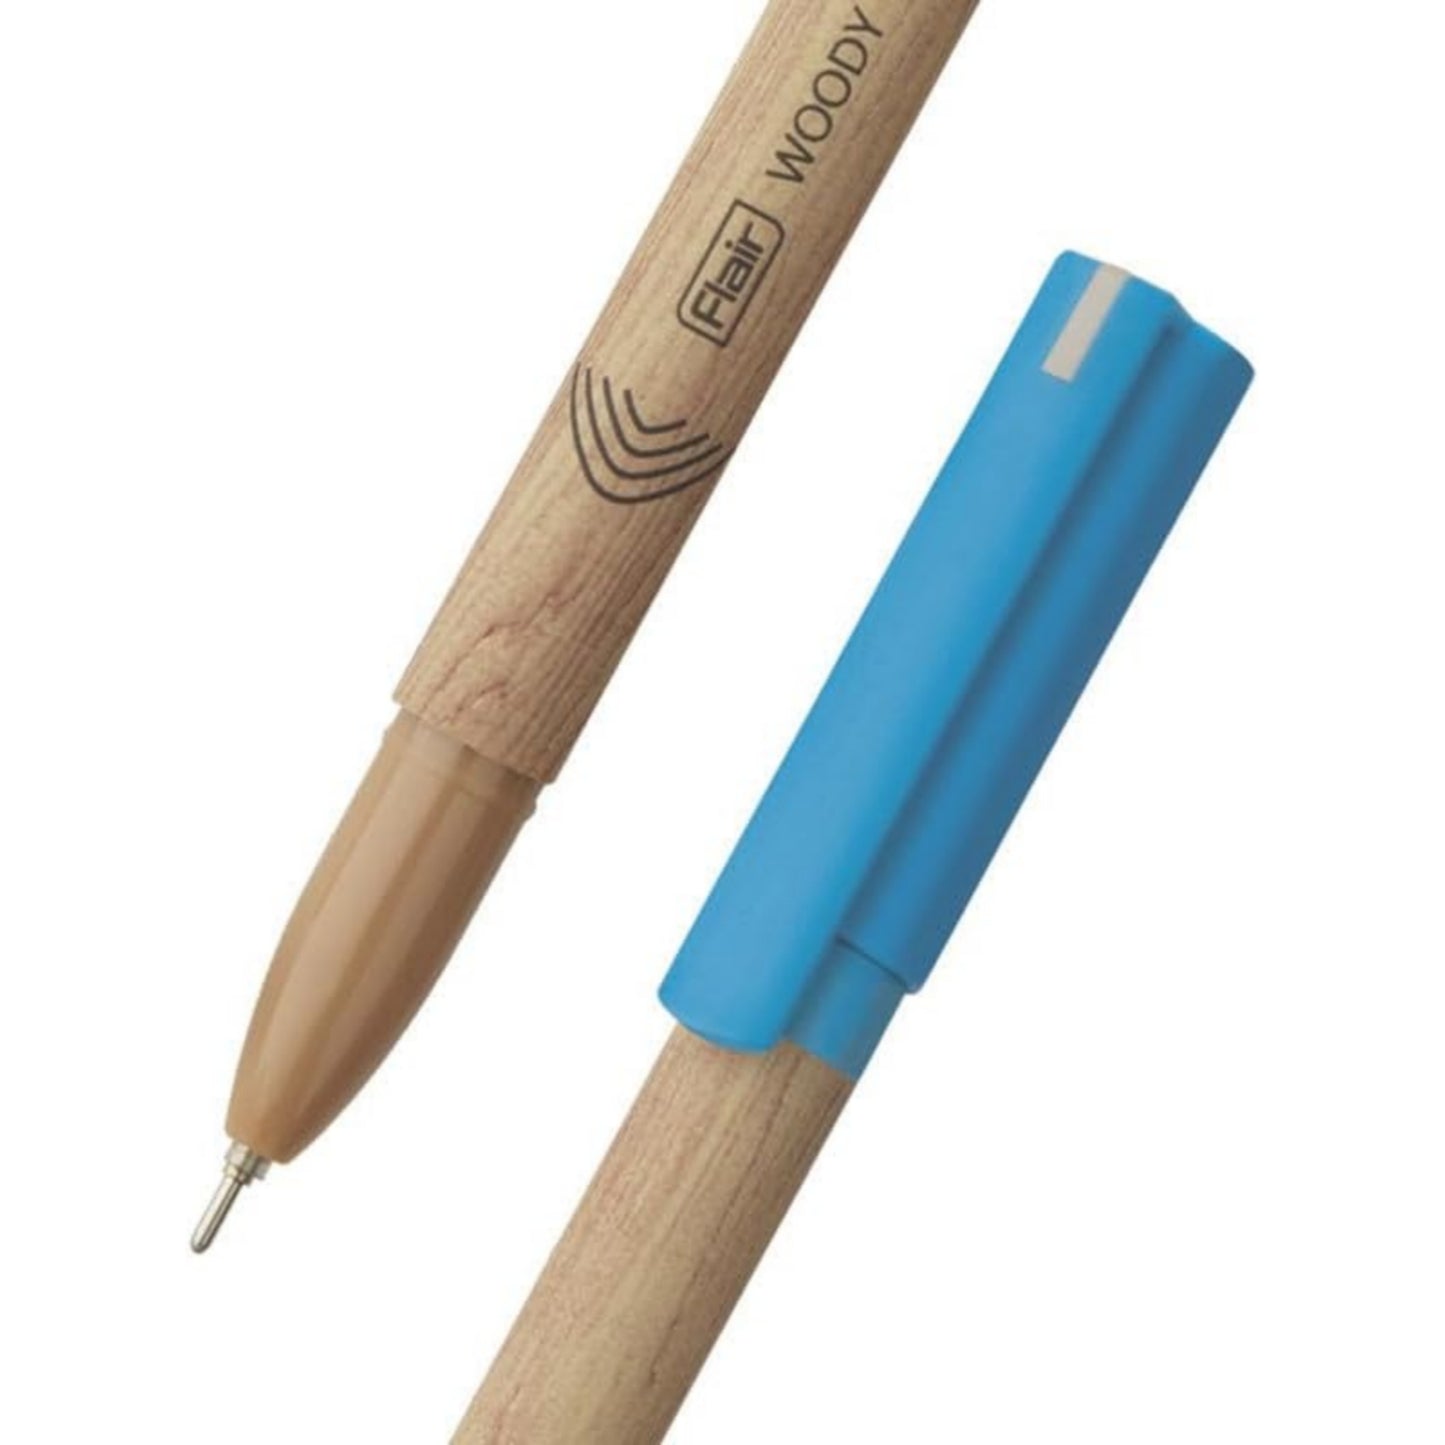 Flair Woody 0.7mm Ball Pen | Attractive Woody Design | Smooth Ink Flow System With Low-Viscosity Ink | Smudge Free Writing | Blue Ink - Pack of 10 Pens